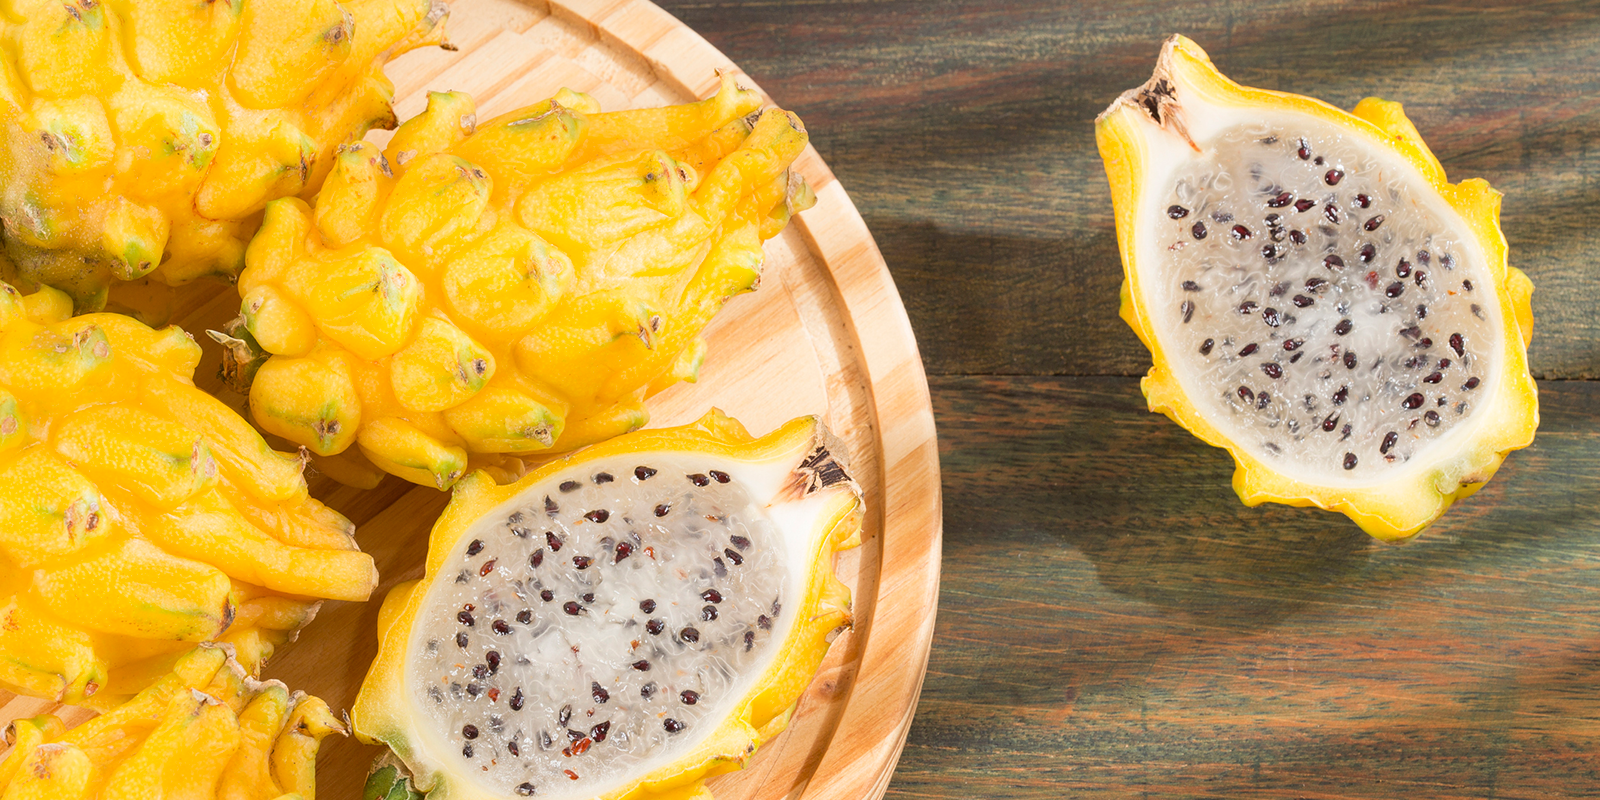 What does yellow dragonfruit taste like?